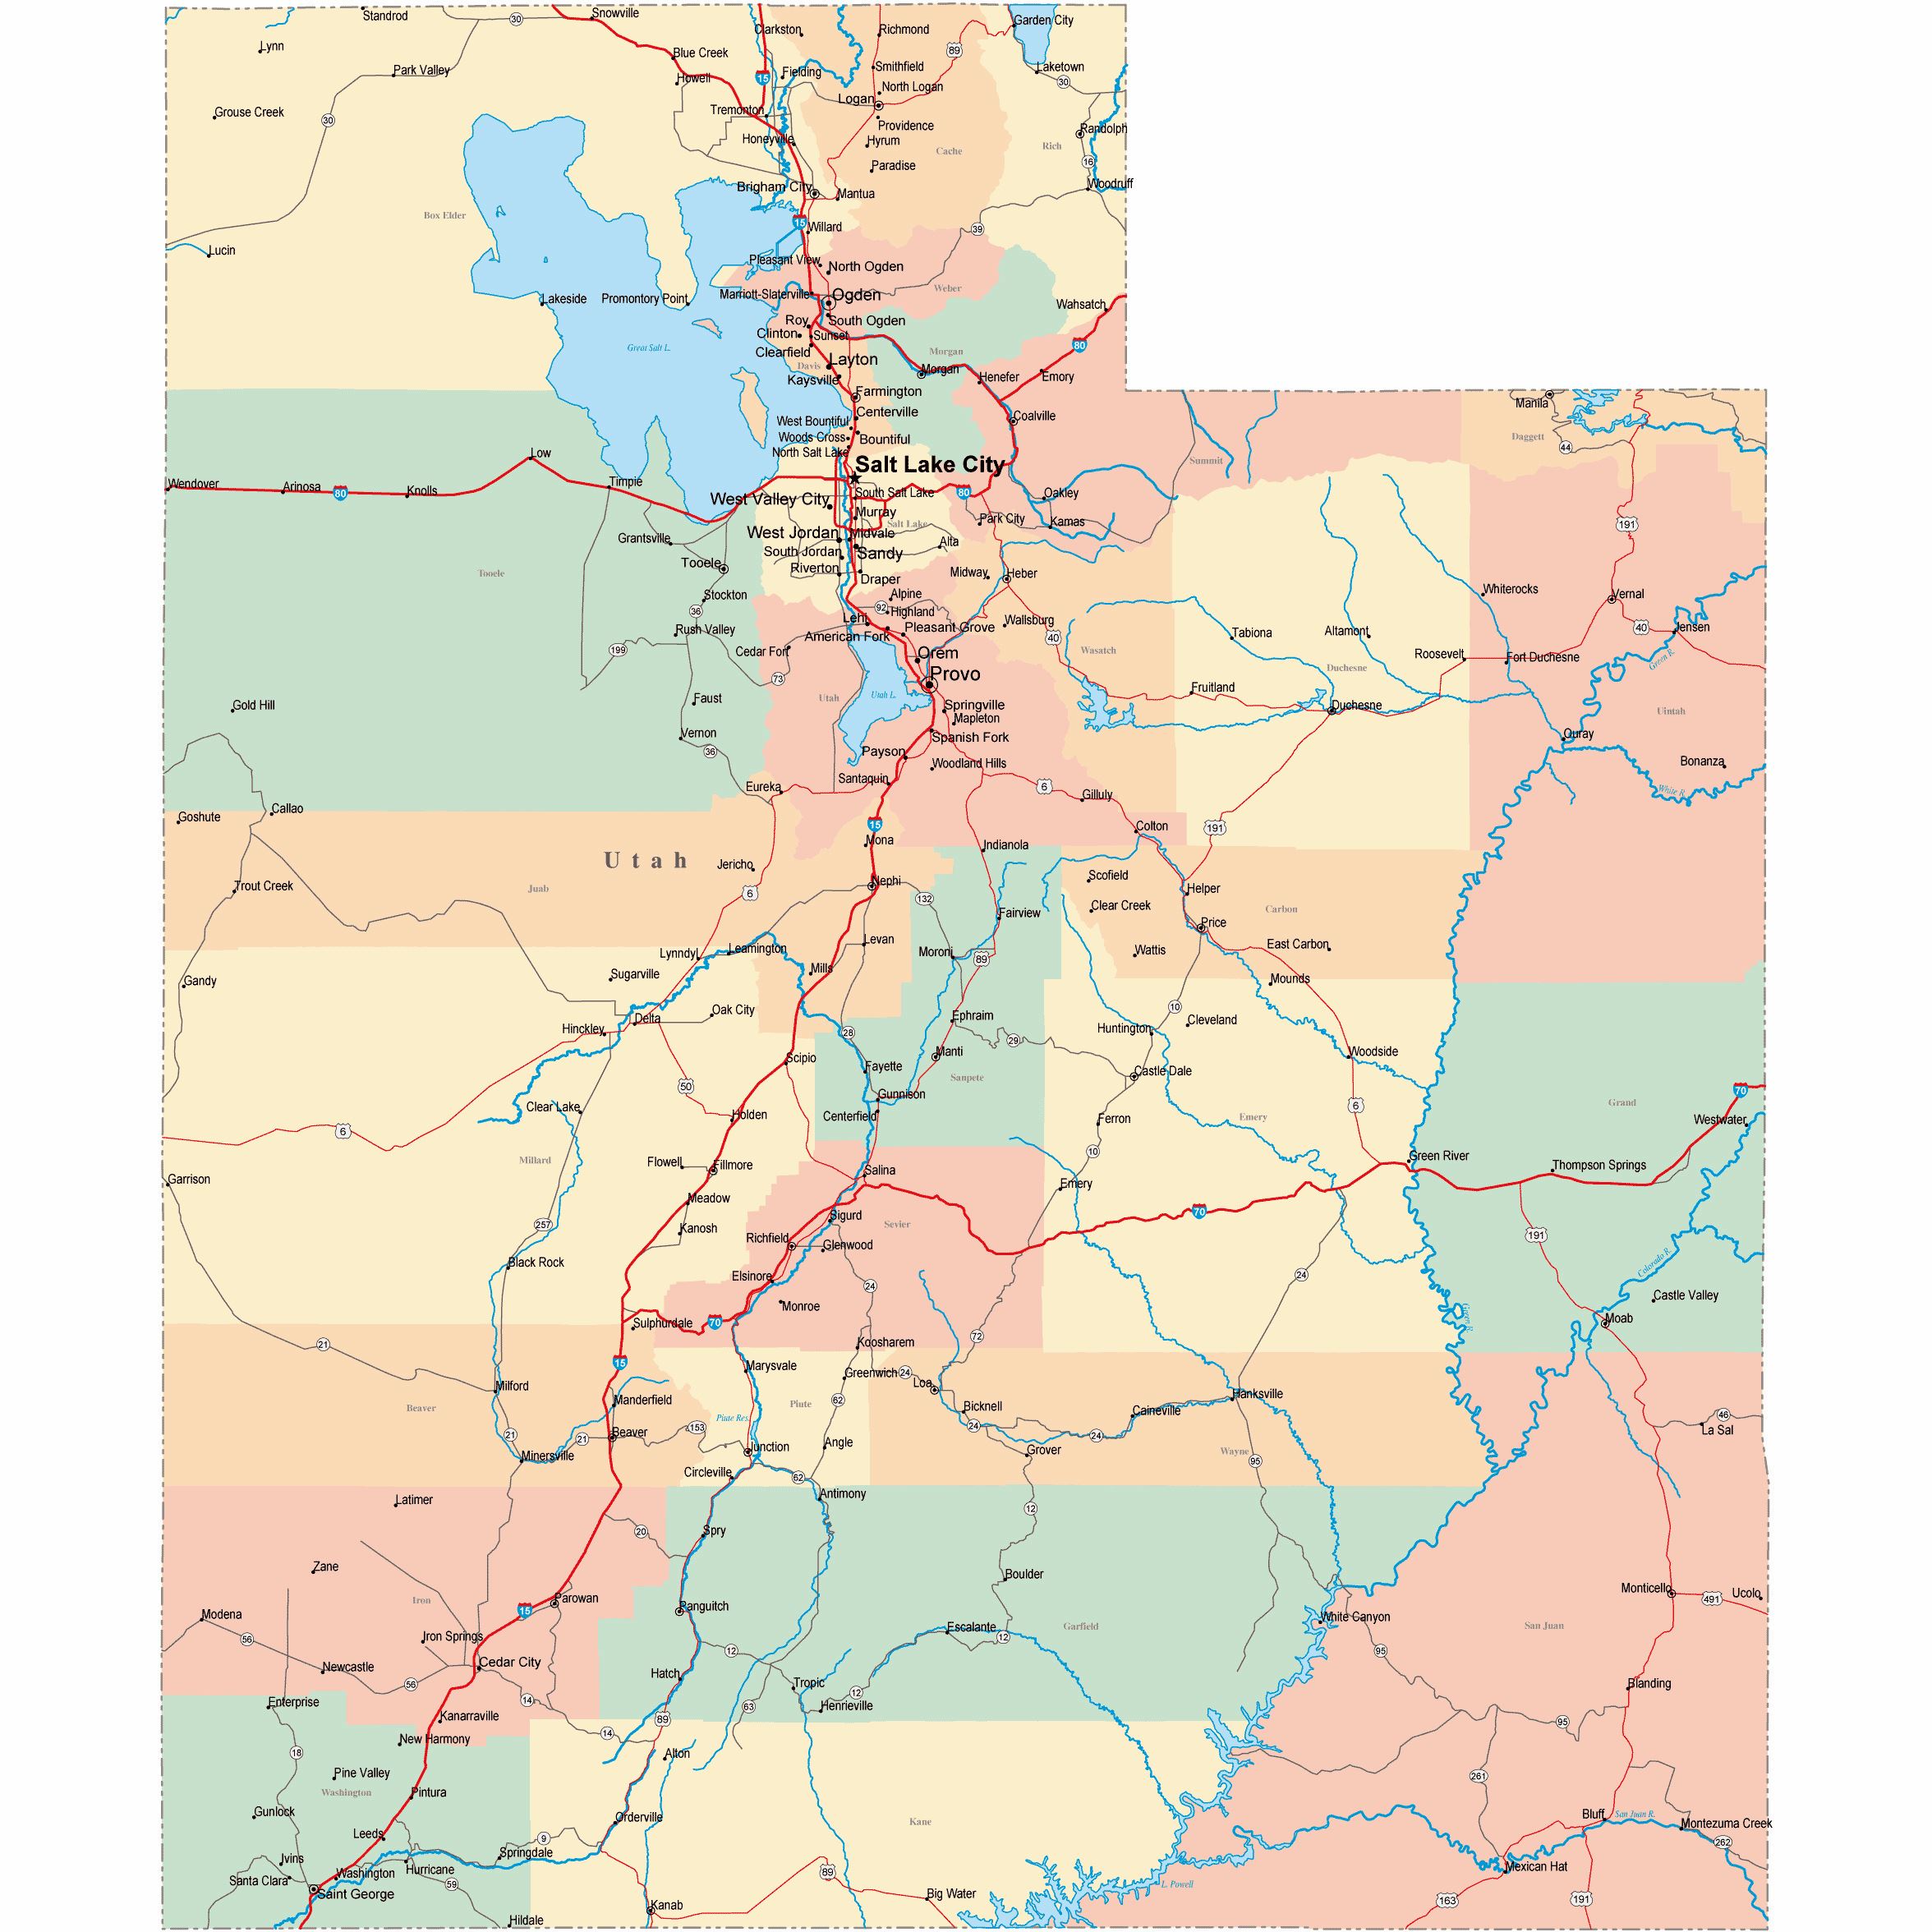 Large Utah Maps For Free Download And Print High Resolution And Detailed Maps